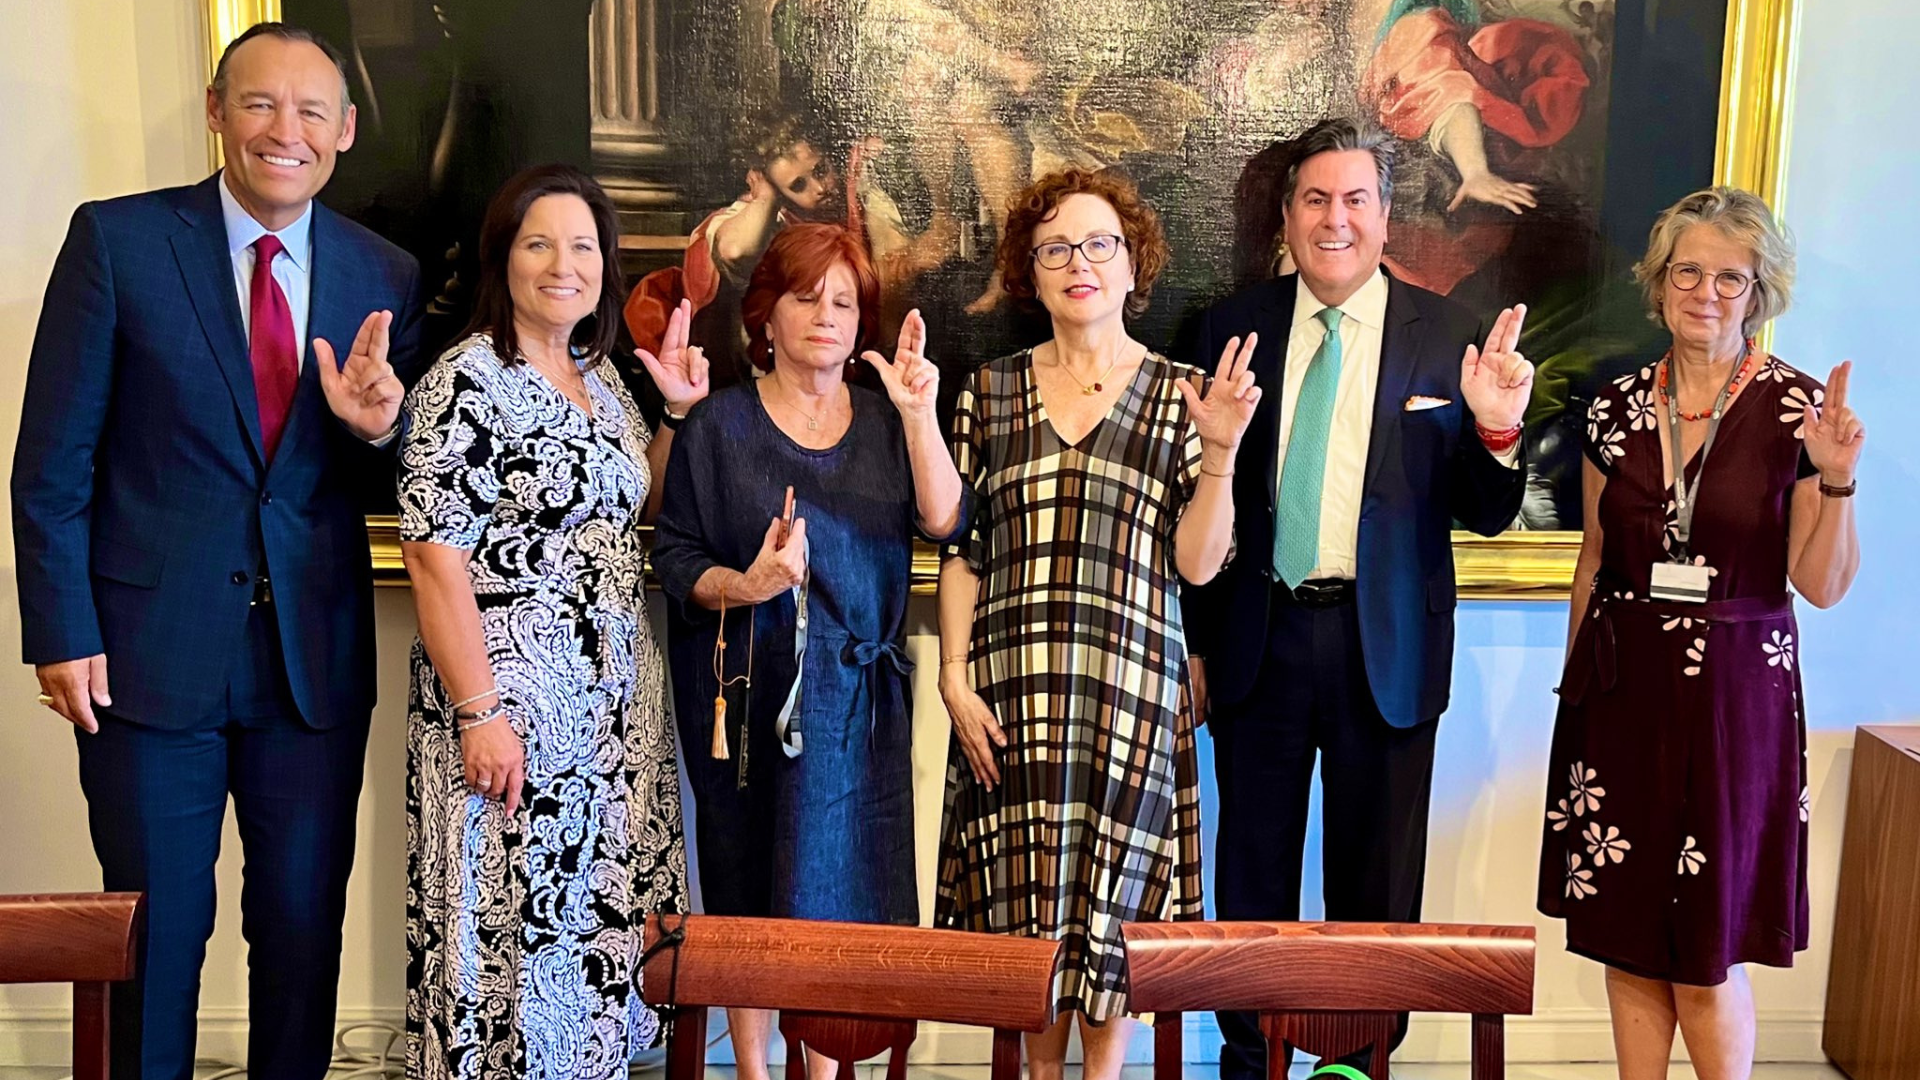 President Damphousse and Beth Damphousse with TSUS Chancellor McCall meeting with dignitaries in Madrid